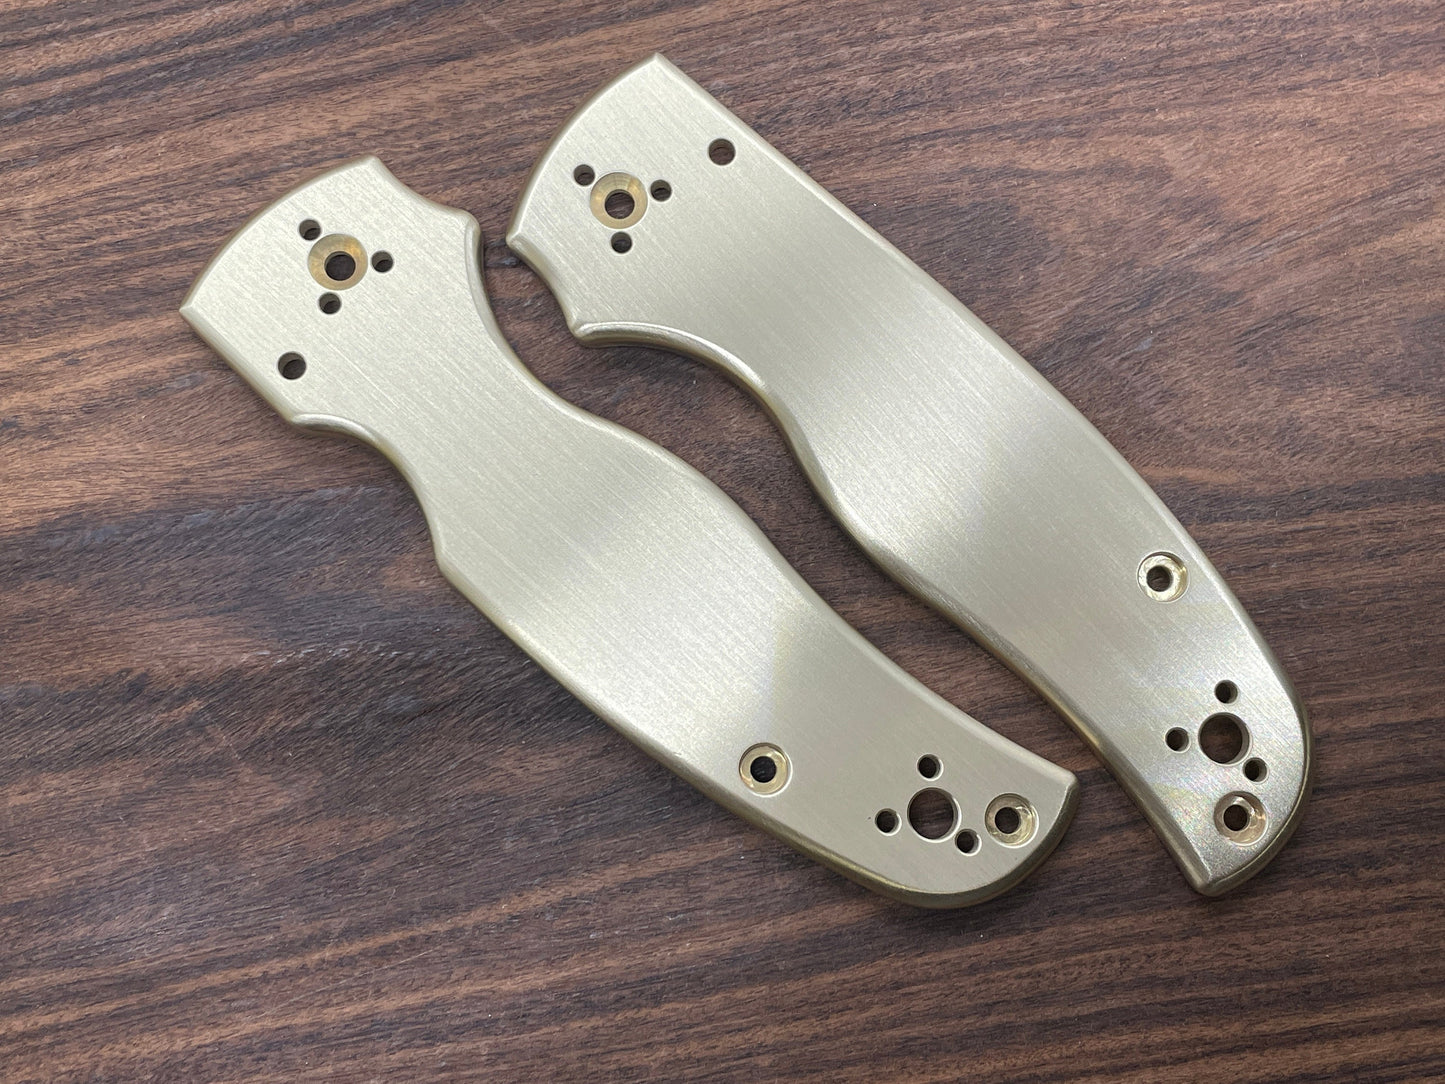 Brushed Brass Scales for SHAMAN Spyderco